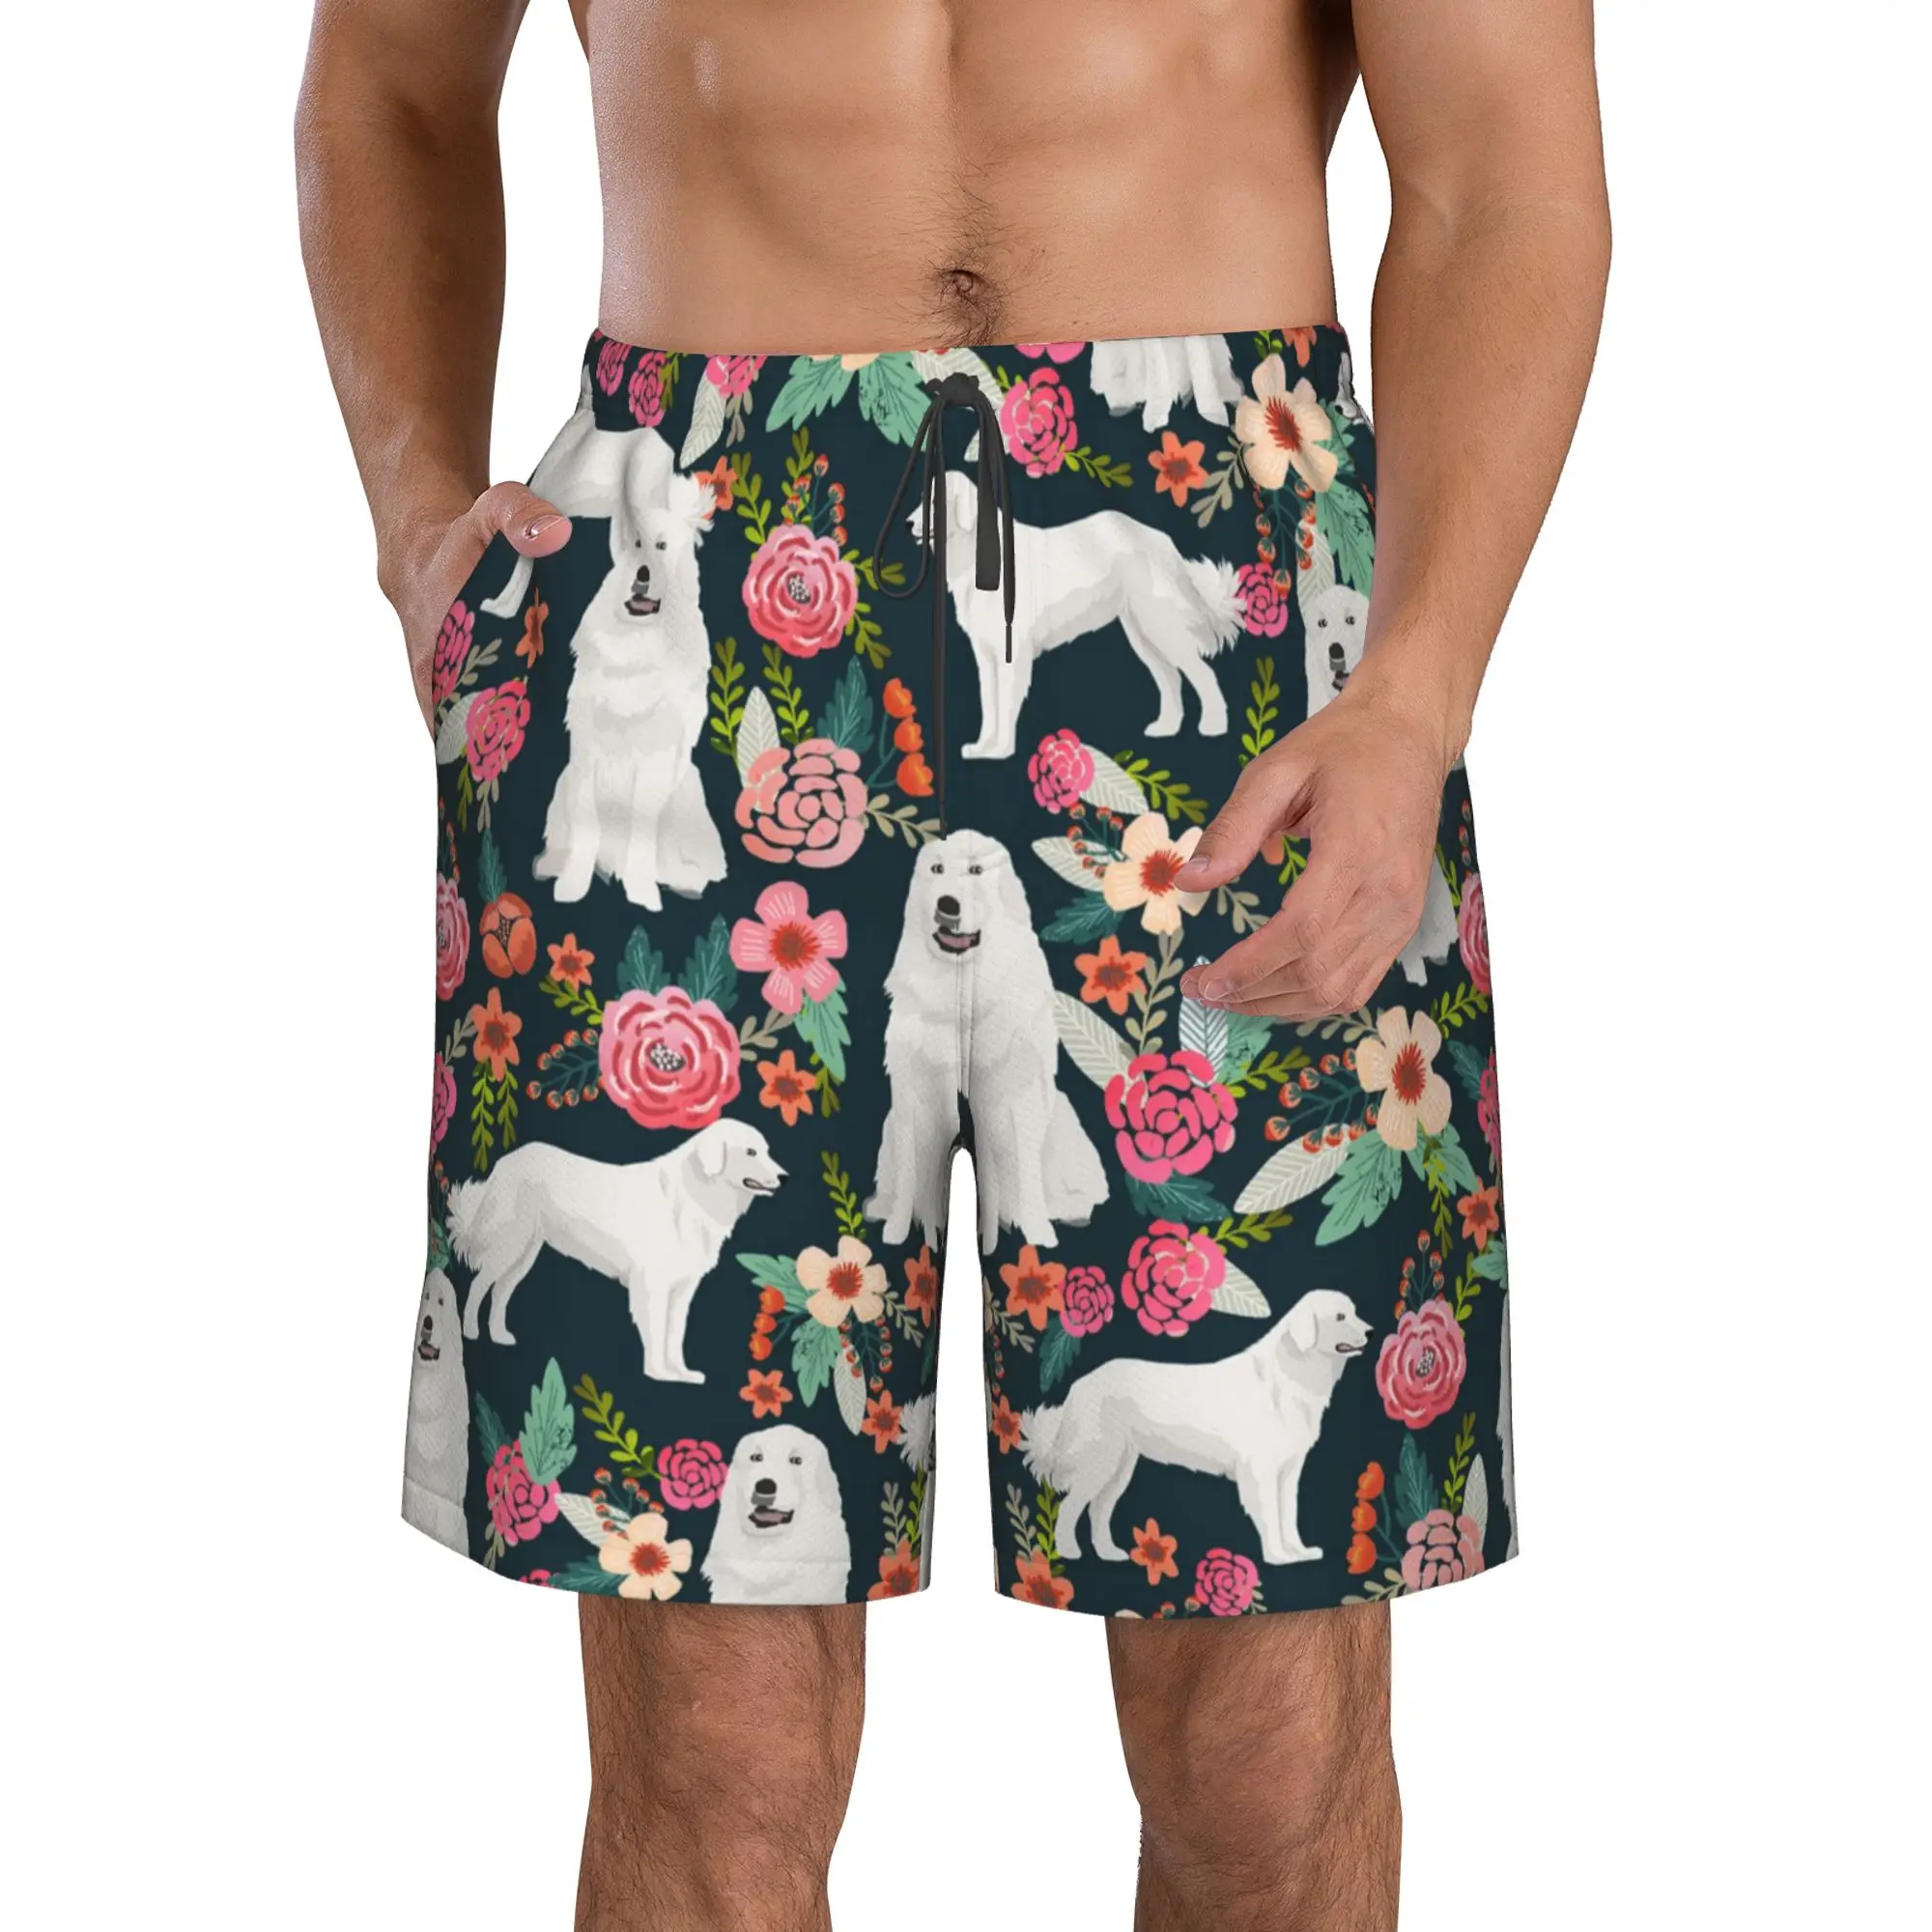 

Great Pyrenees Dog Swim Trunks Men Quick Dry Swim Shorts Stretch Water Beach Shorts with Compression Liner Zipper Pocket S